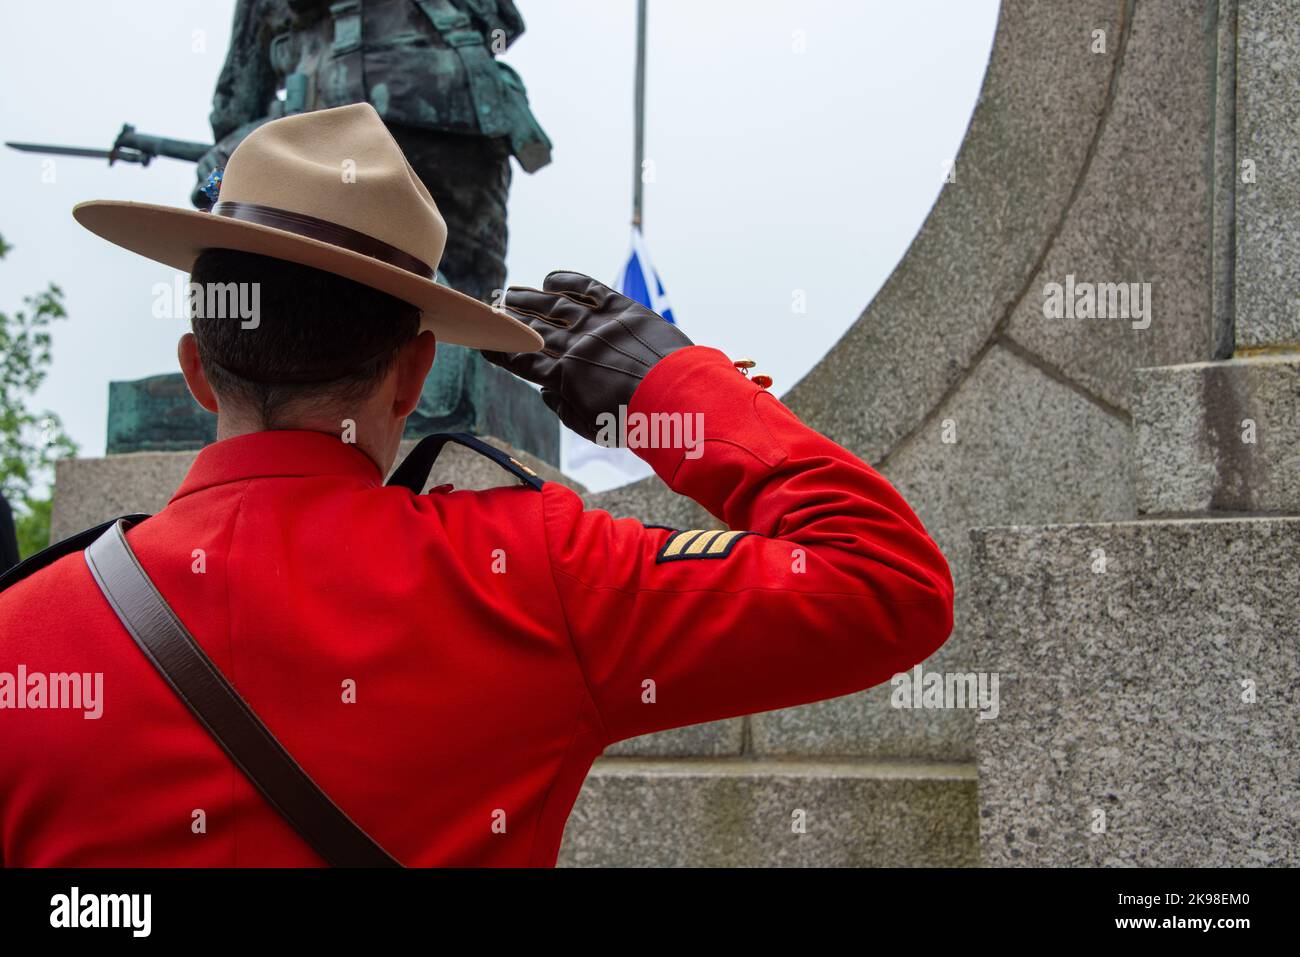 An RCMP officer stands at attention saluting during a ceremony. The serge uniform is vibrant red in color.The officer is wearing a tan colored Stetson Stock Photo